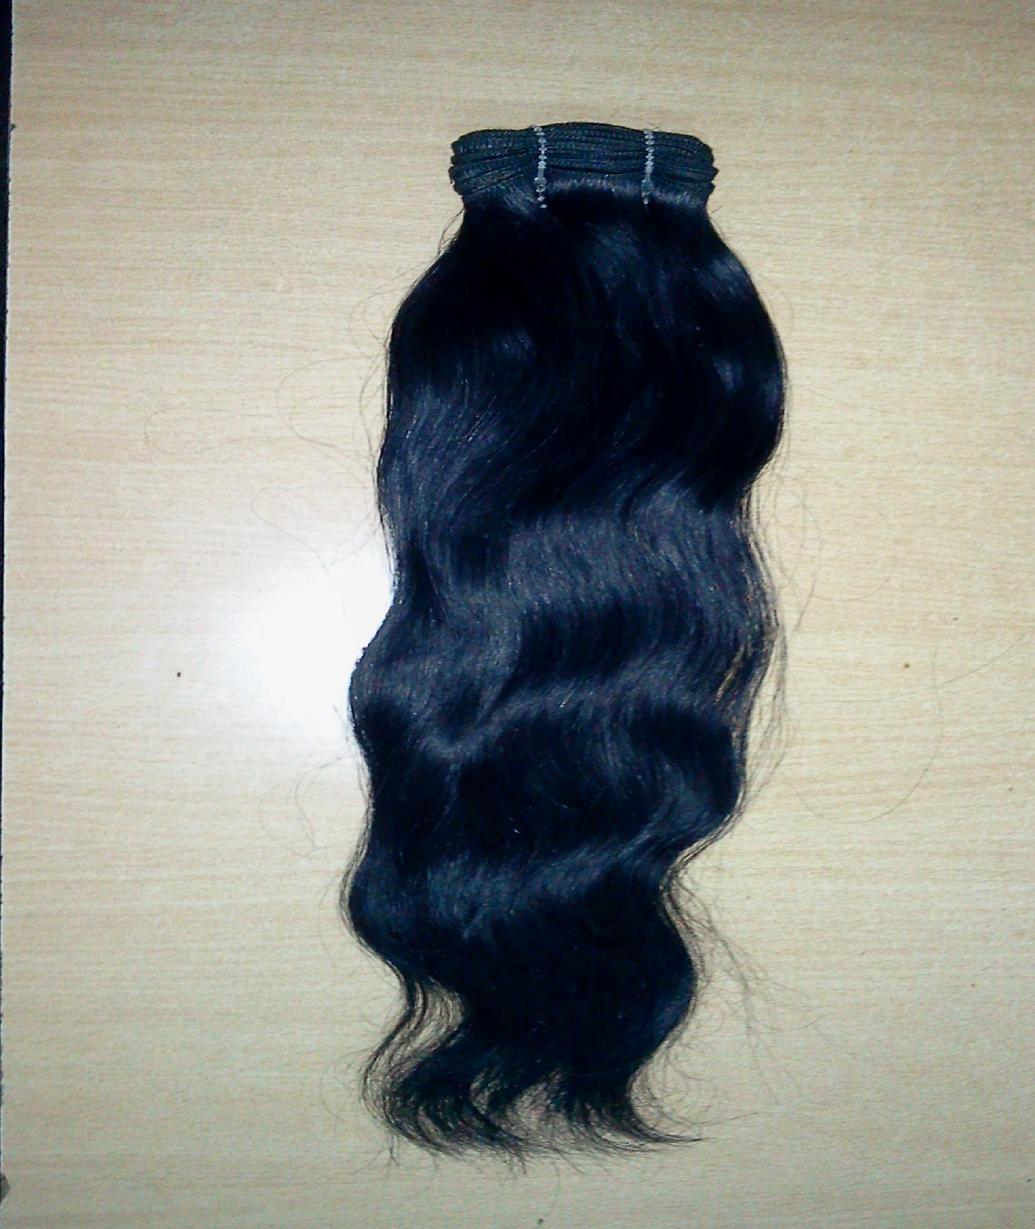 Top Quality Indian Hair